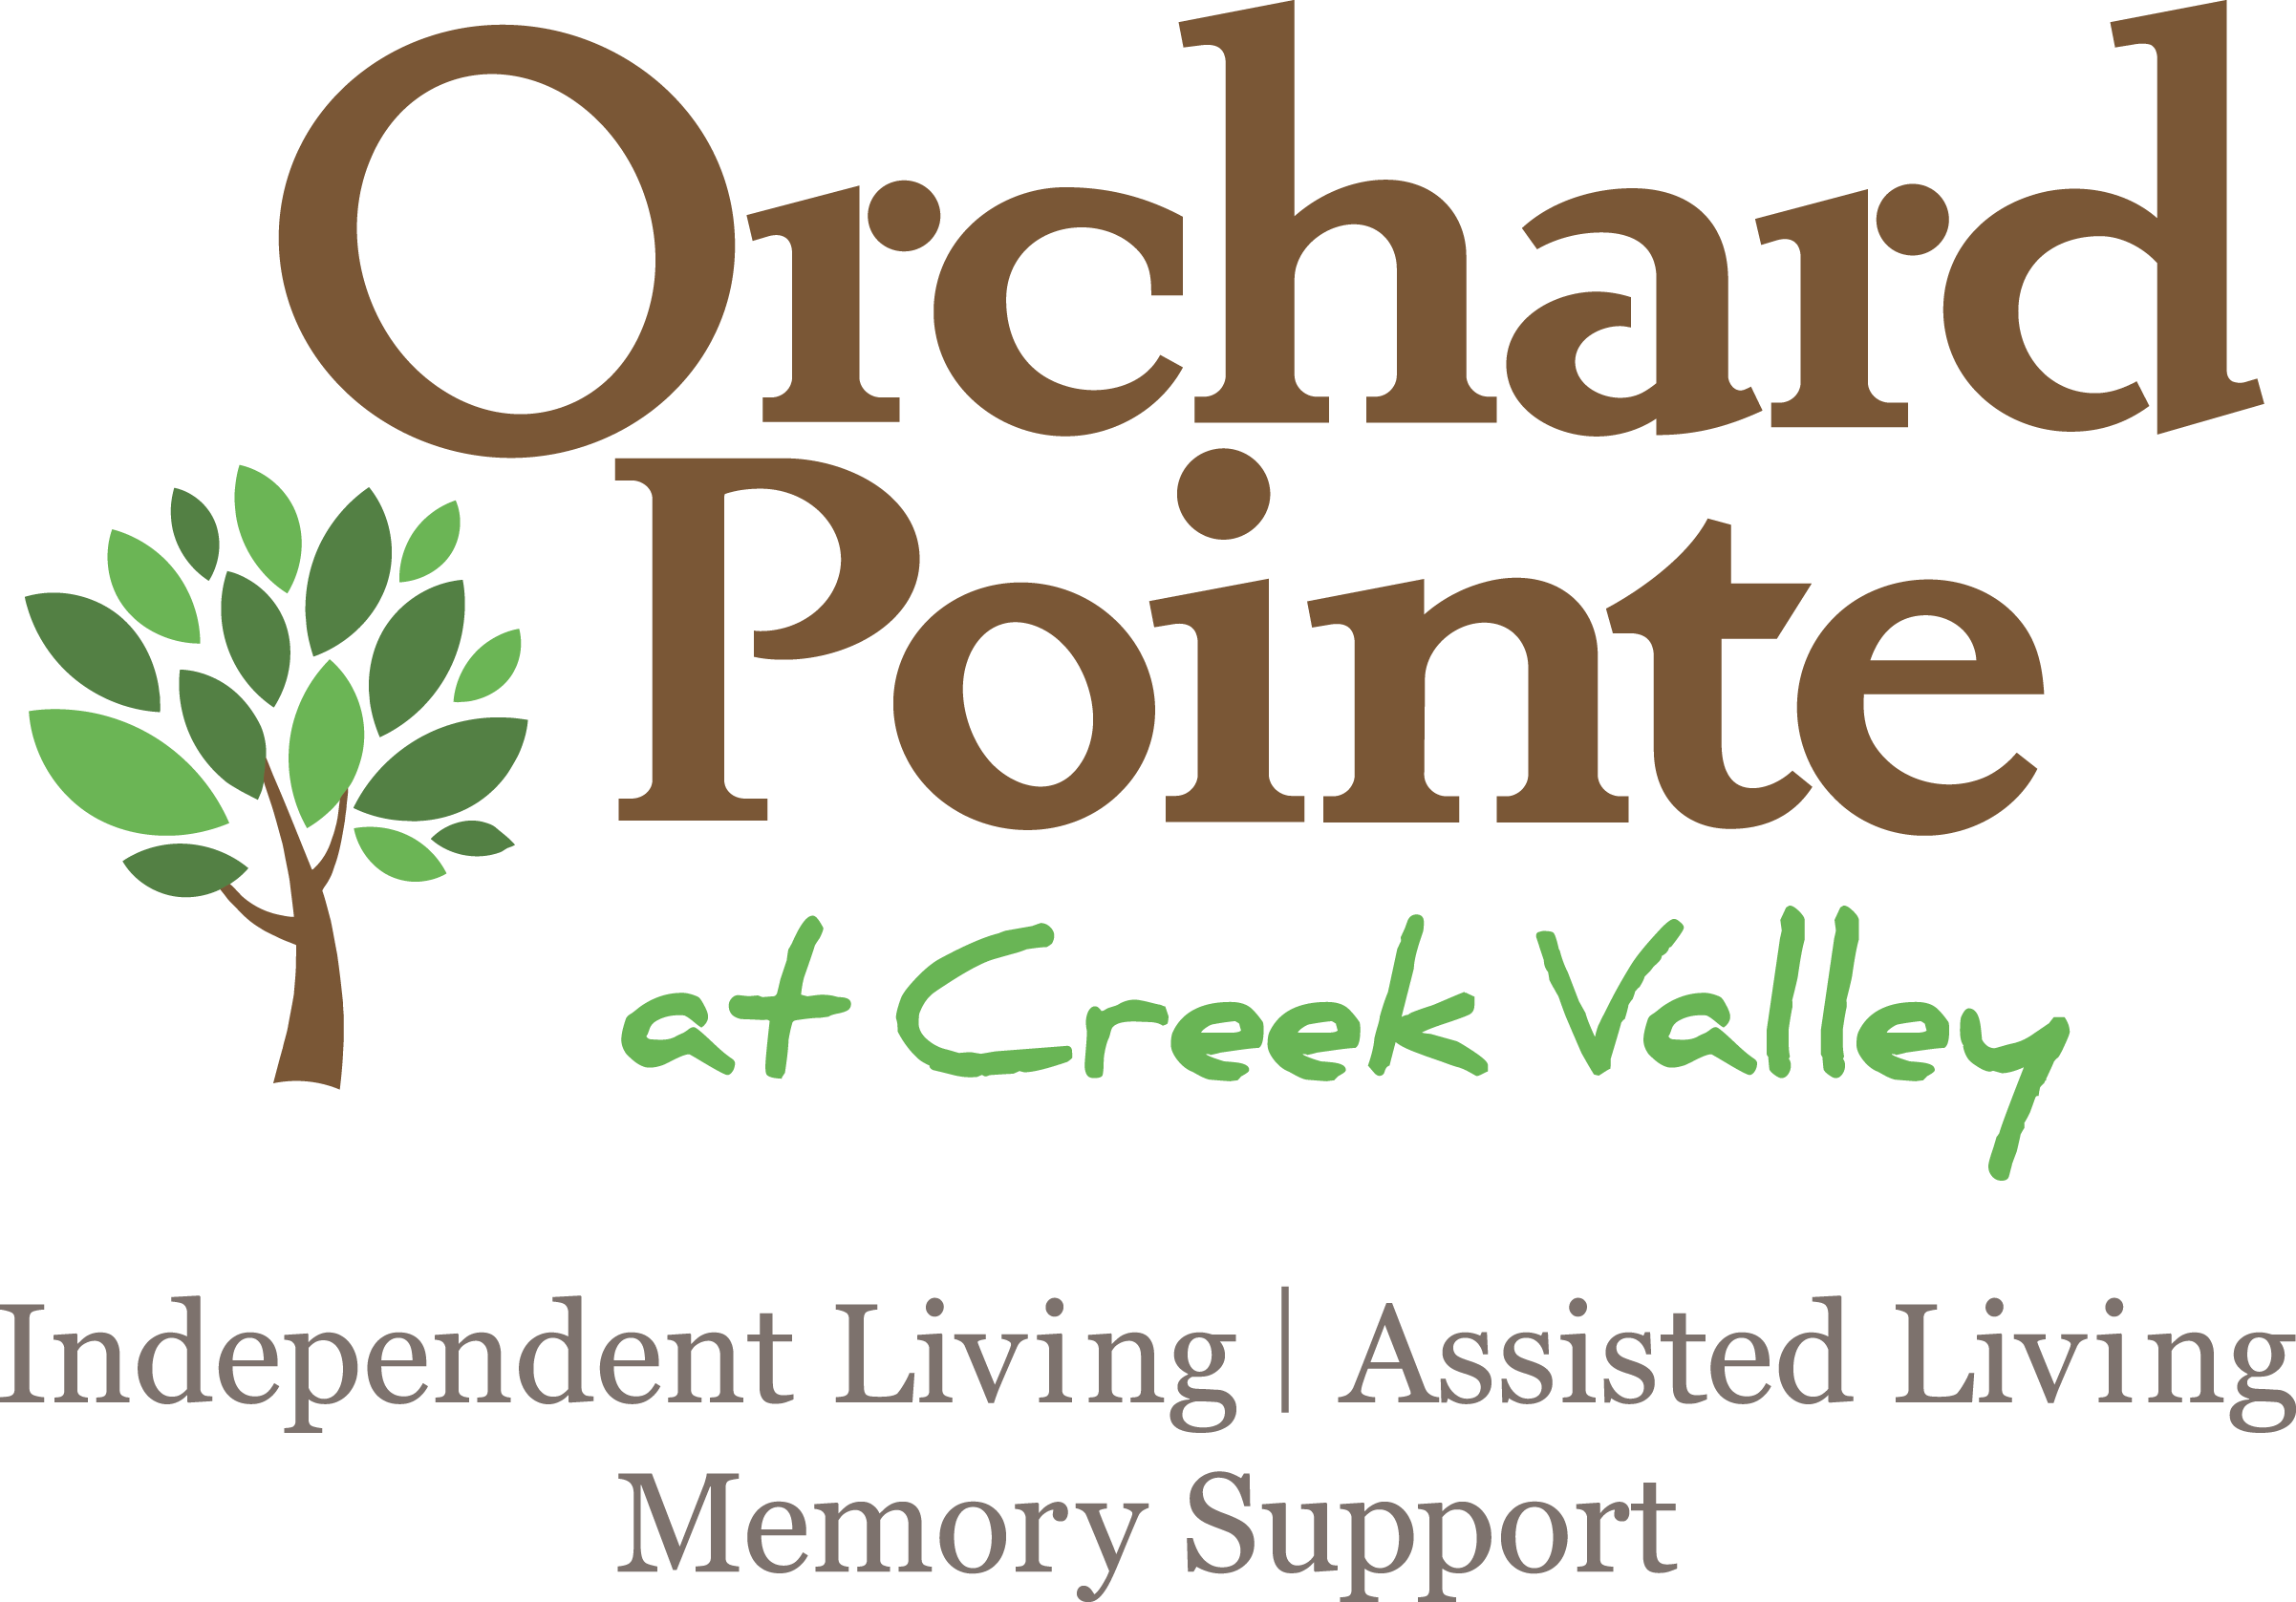 E. Orchard Pointe at Creek Valley